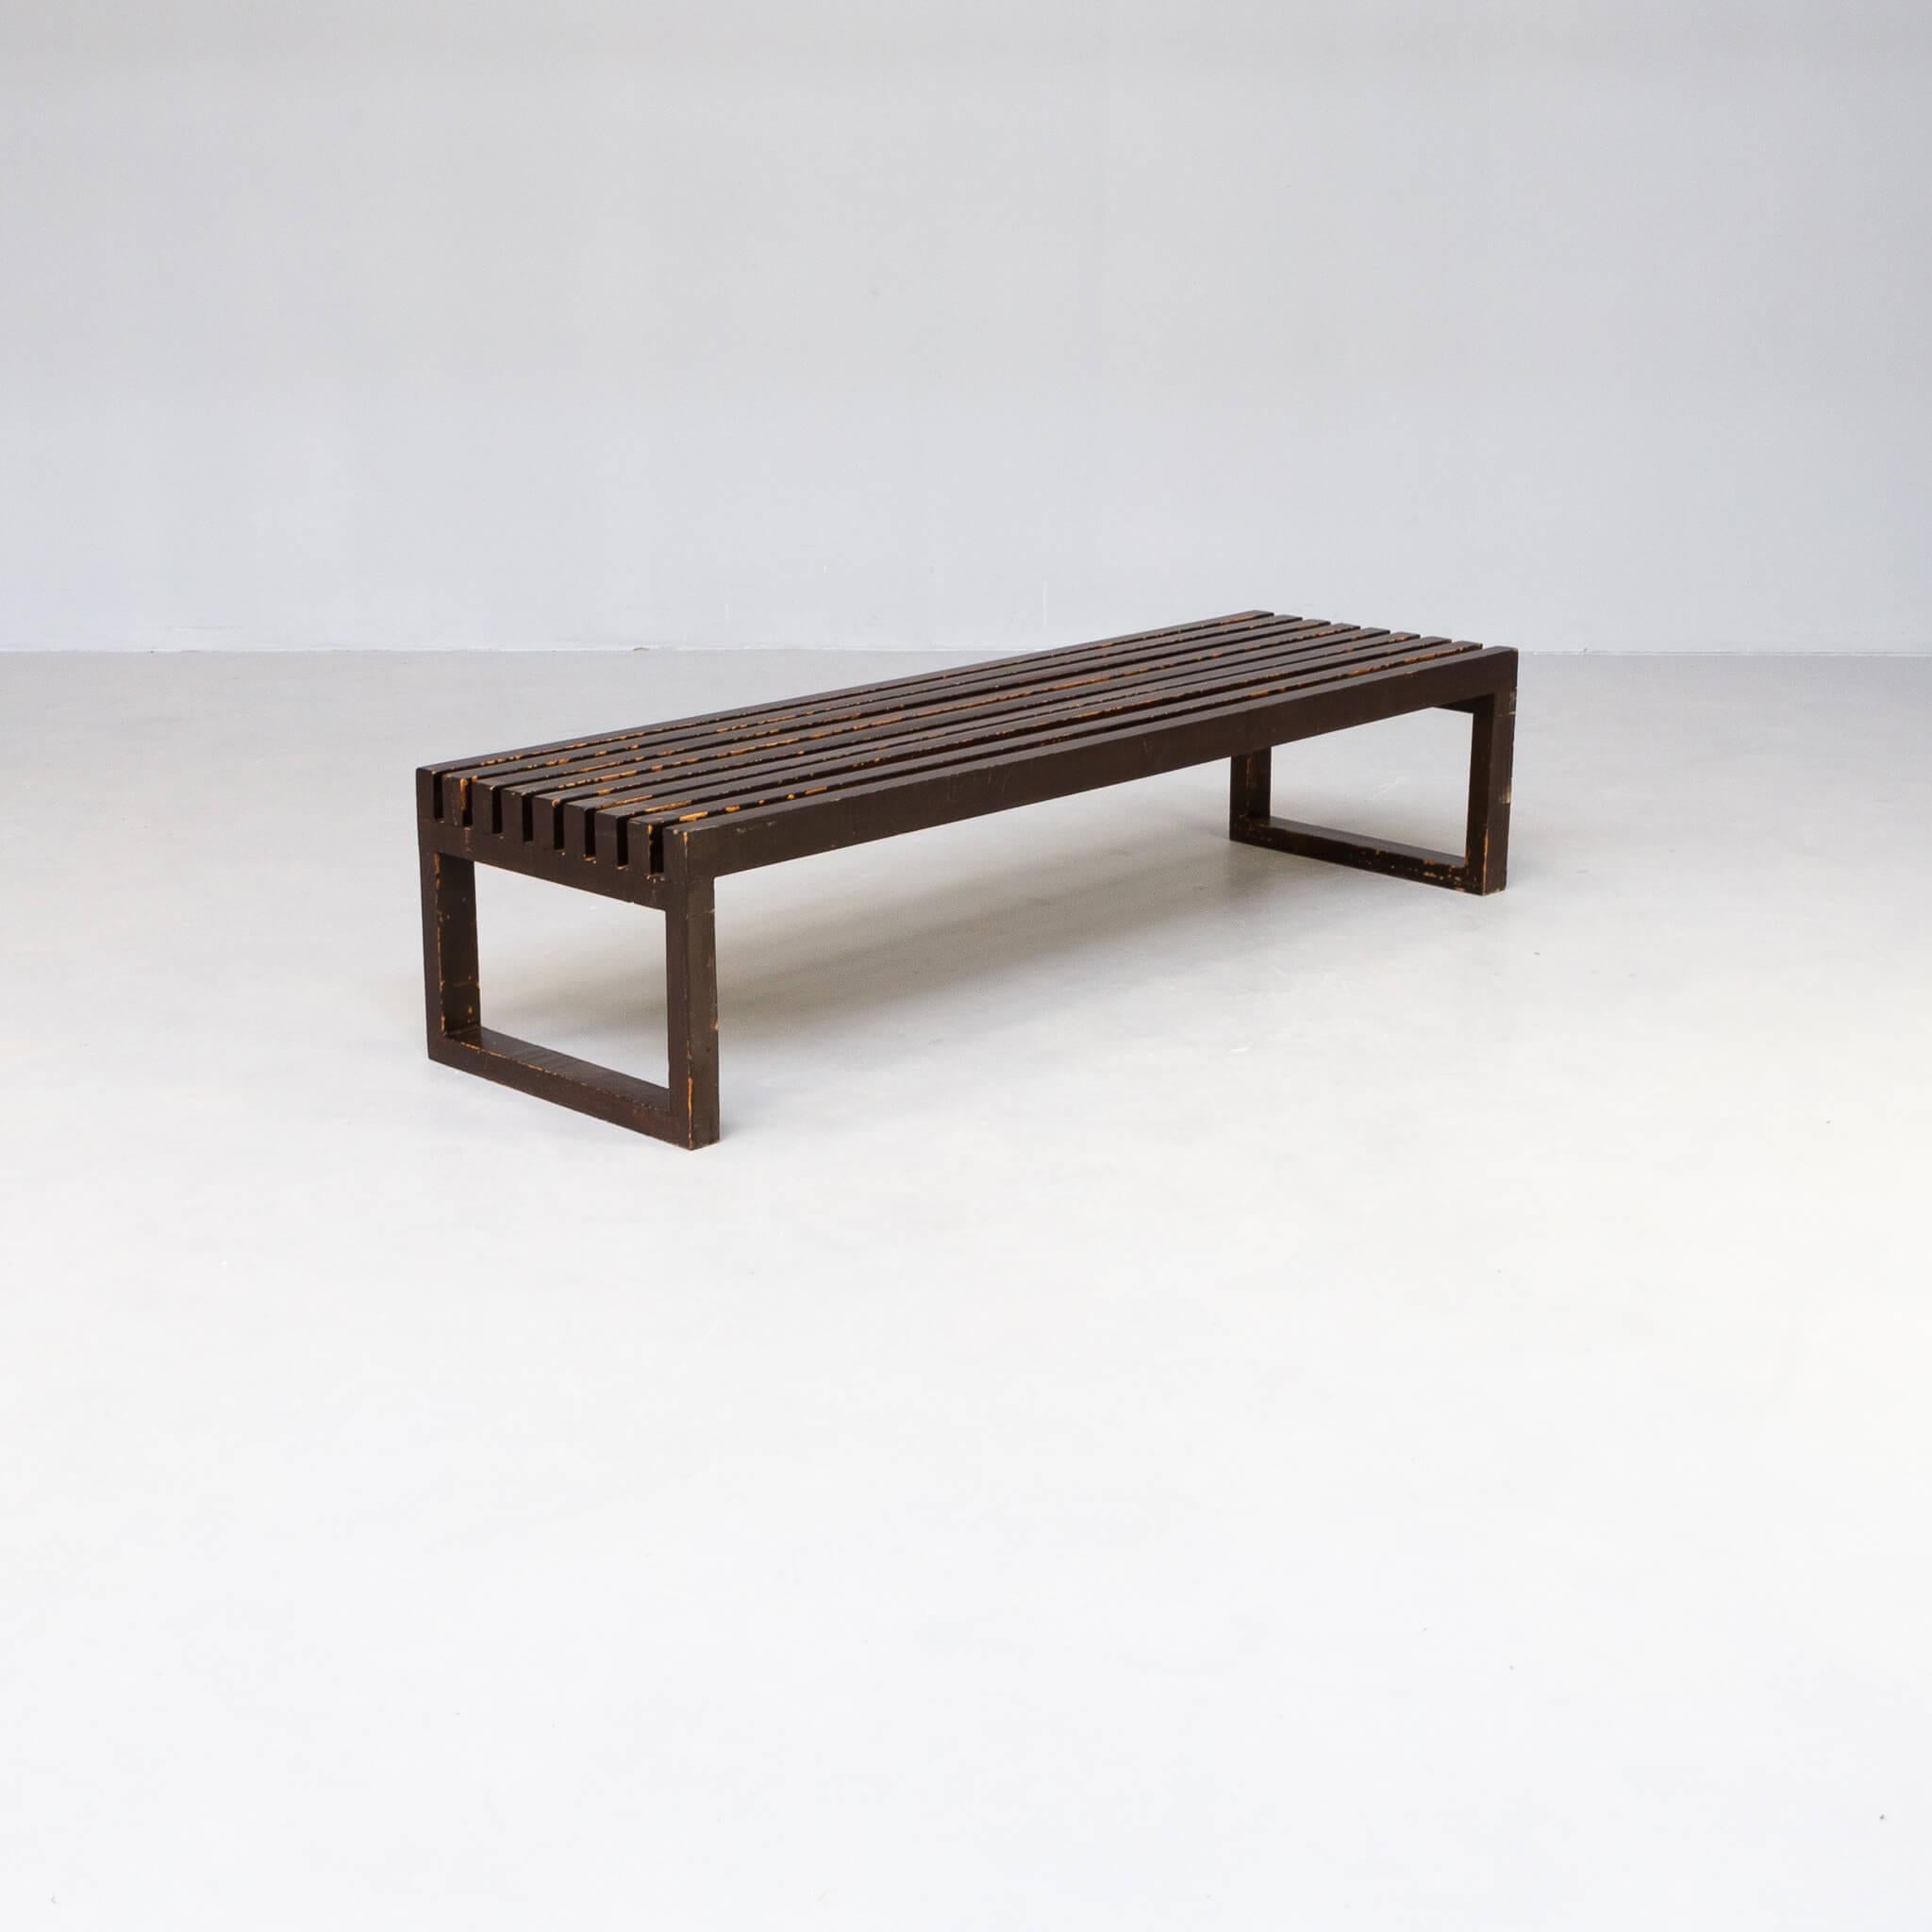 This slatted bench has a beautiful design. The bench is fit for 3 persons and is painted in dark brown paint in the 1990s. We think the wood is in teak or oak, it is firm stable and in good condition.